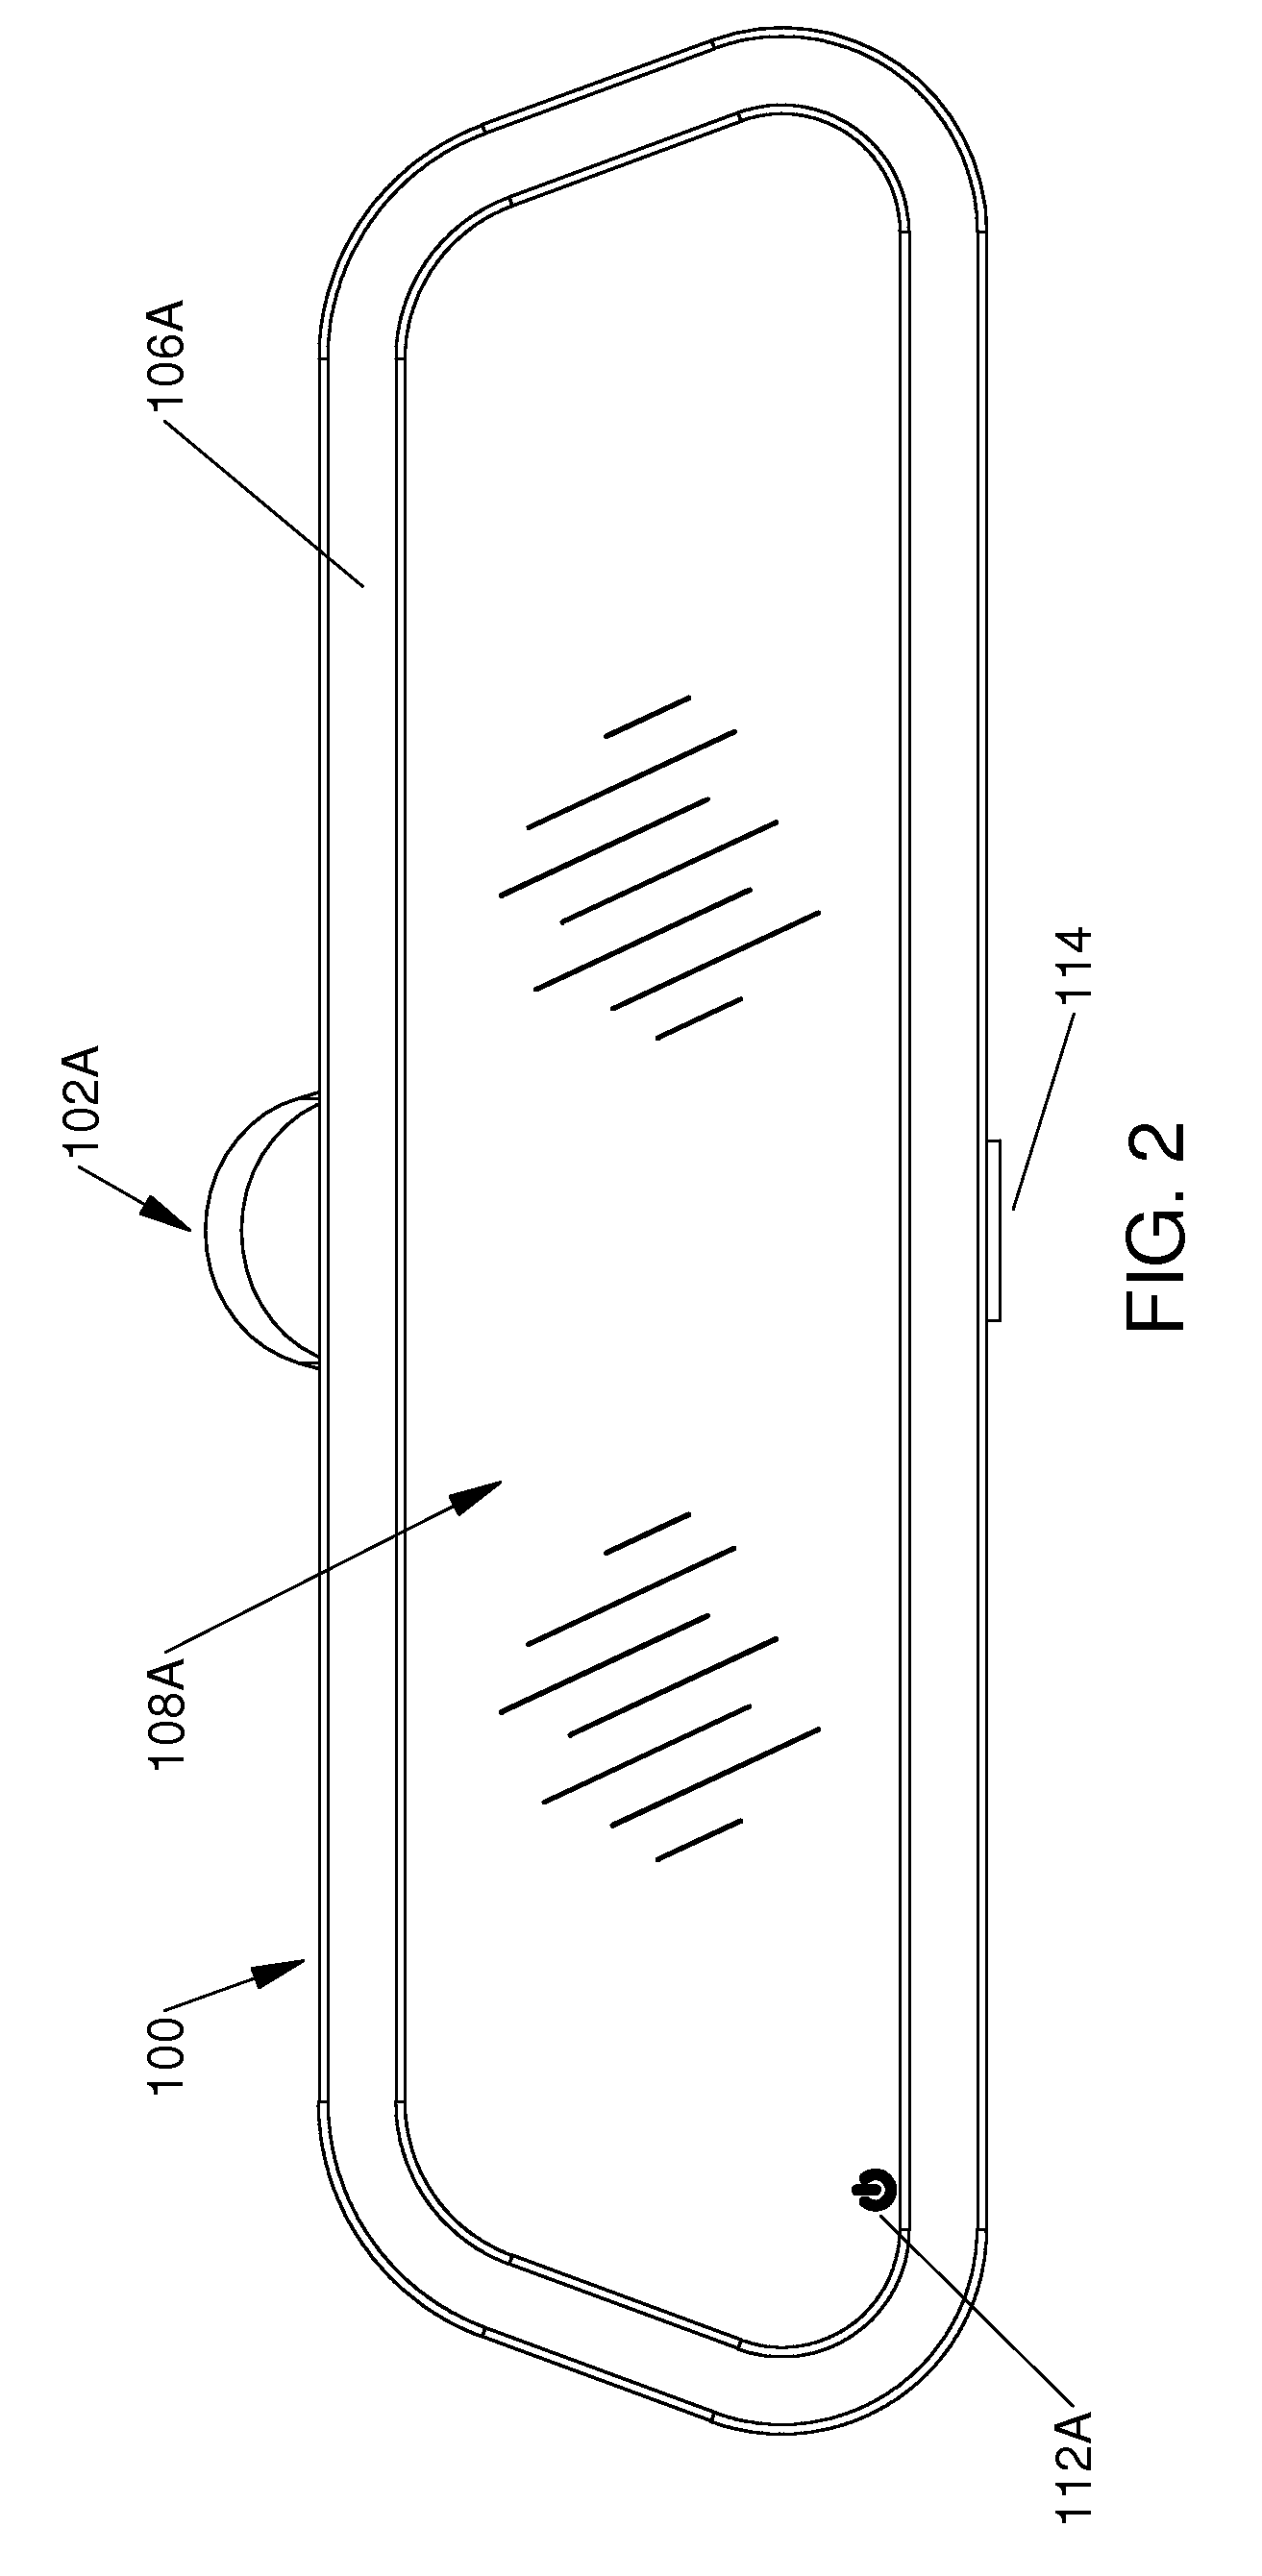 Rearview mirror assembly encompassing a radar detector and/or laser detector